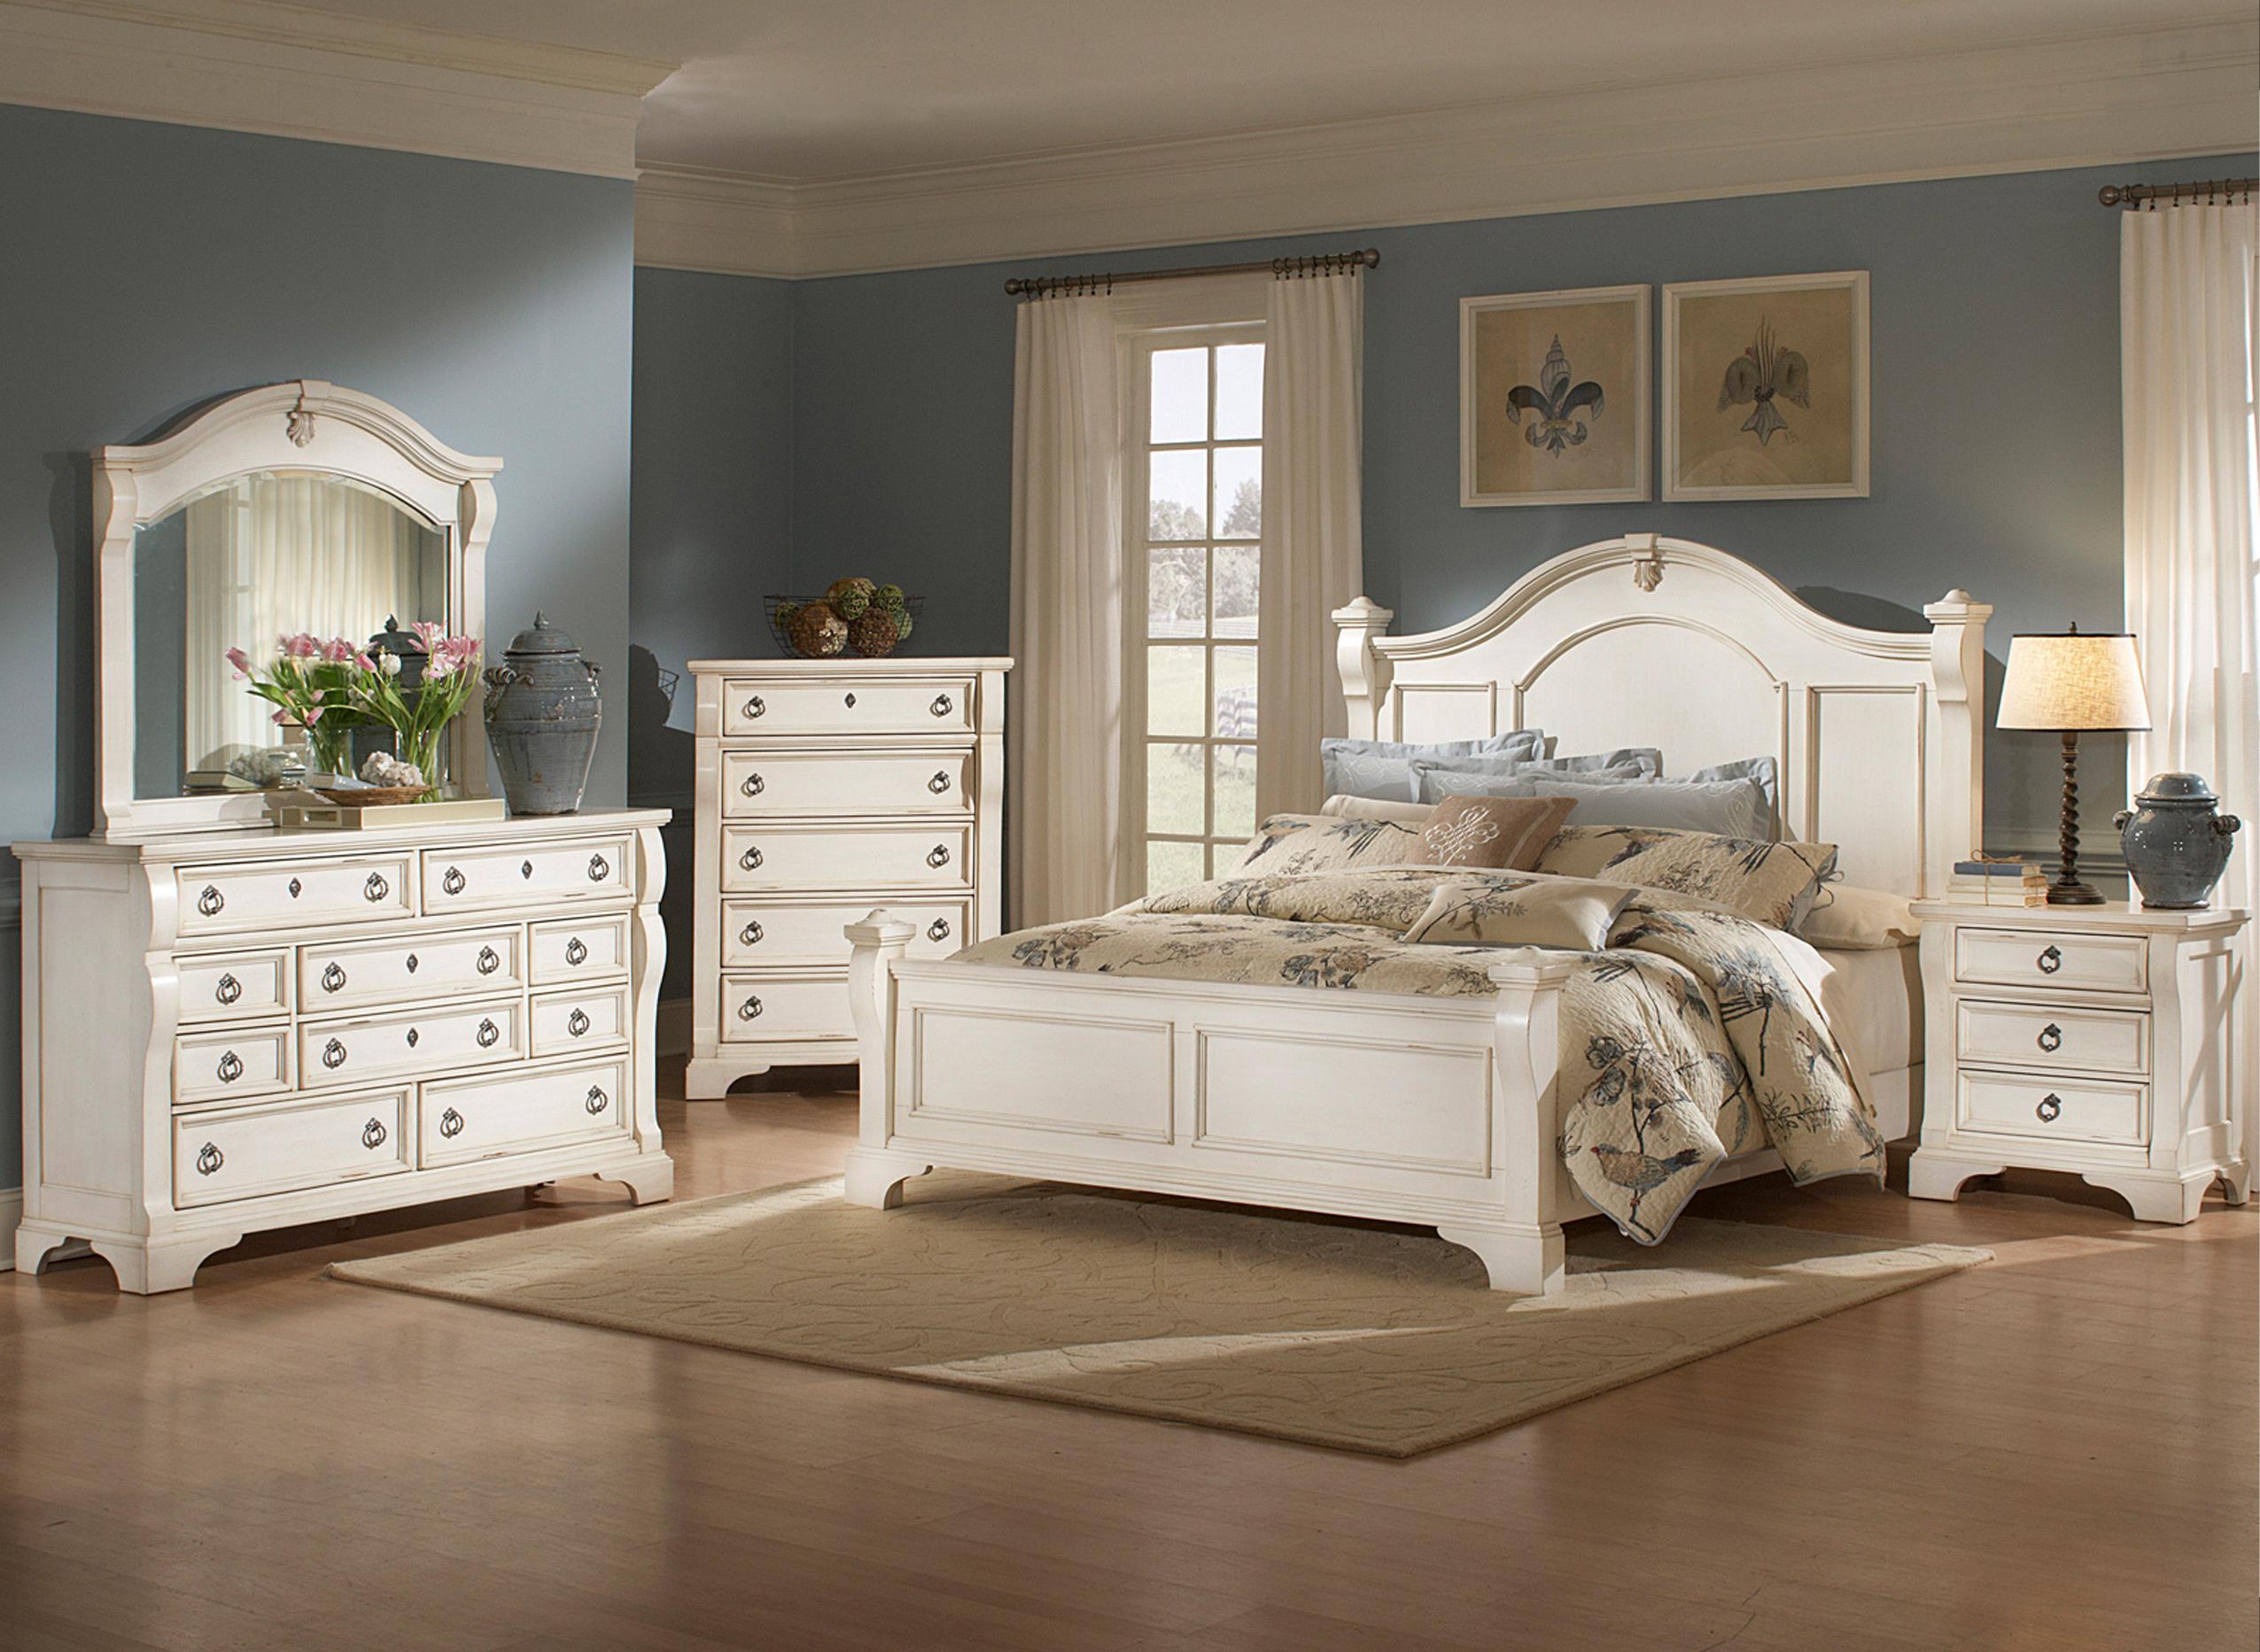 

    
American Woodcrafters HEIRLOOM 2910-66POS Poster Bed White 2910-66POS
